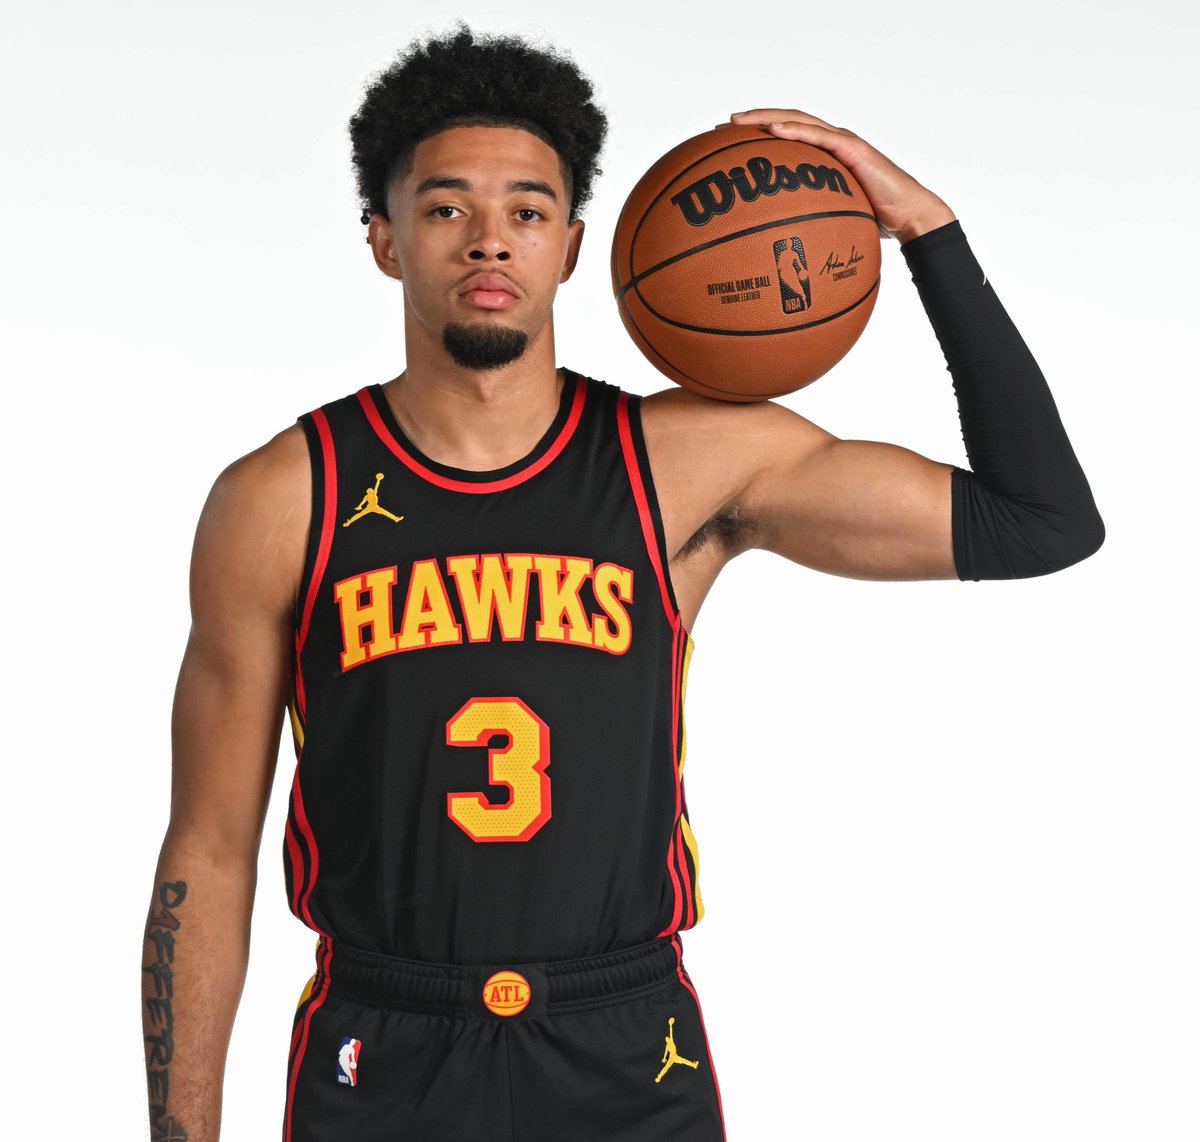 Join us in wishing @sethlundy1 of the @ATLHawks a HAPPY 24th BIRTHDAY! #NBABDAY